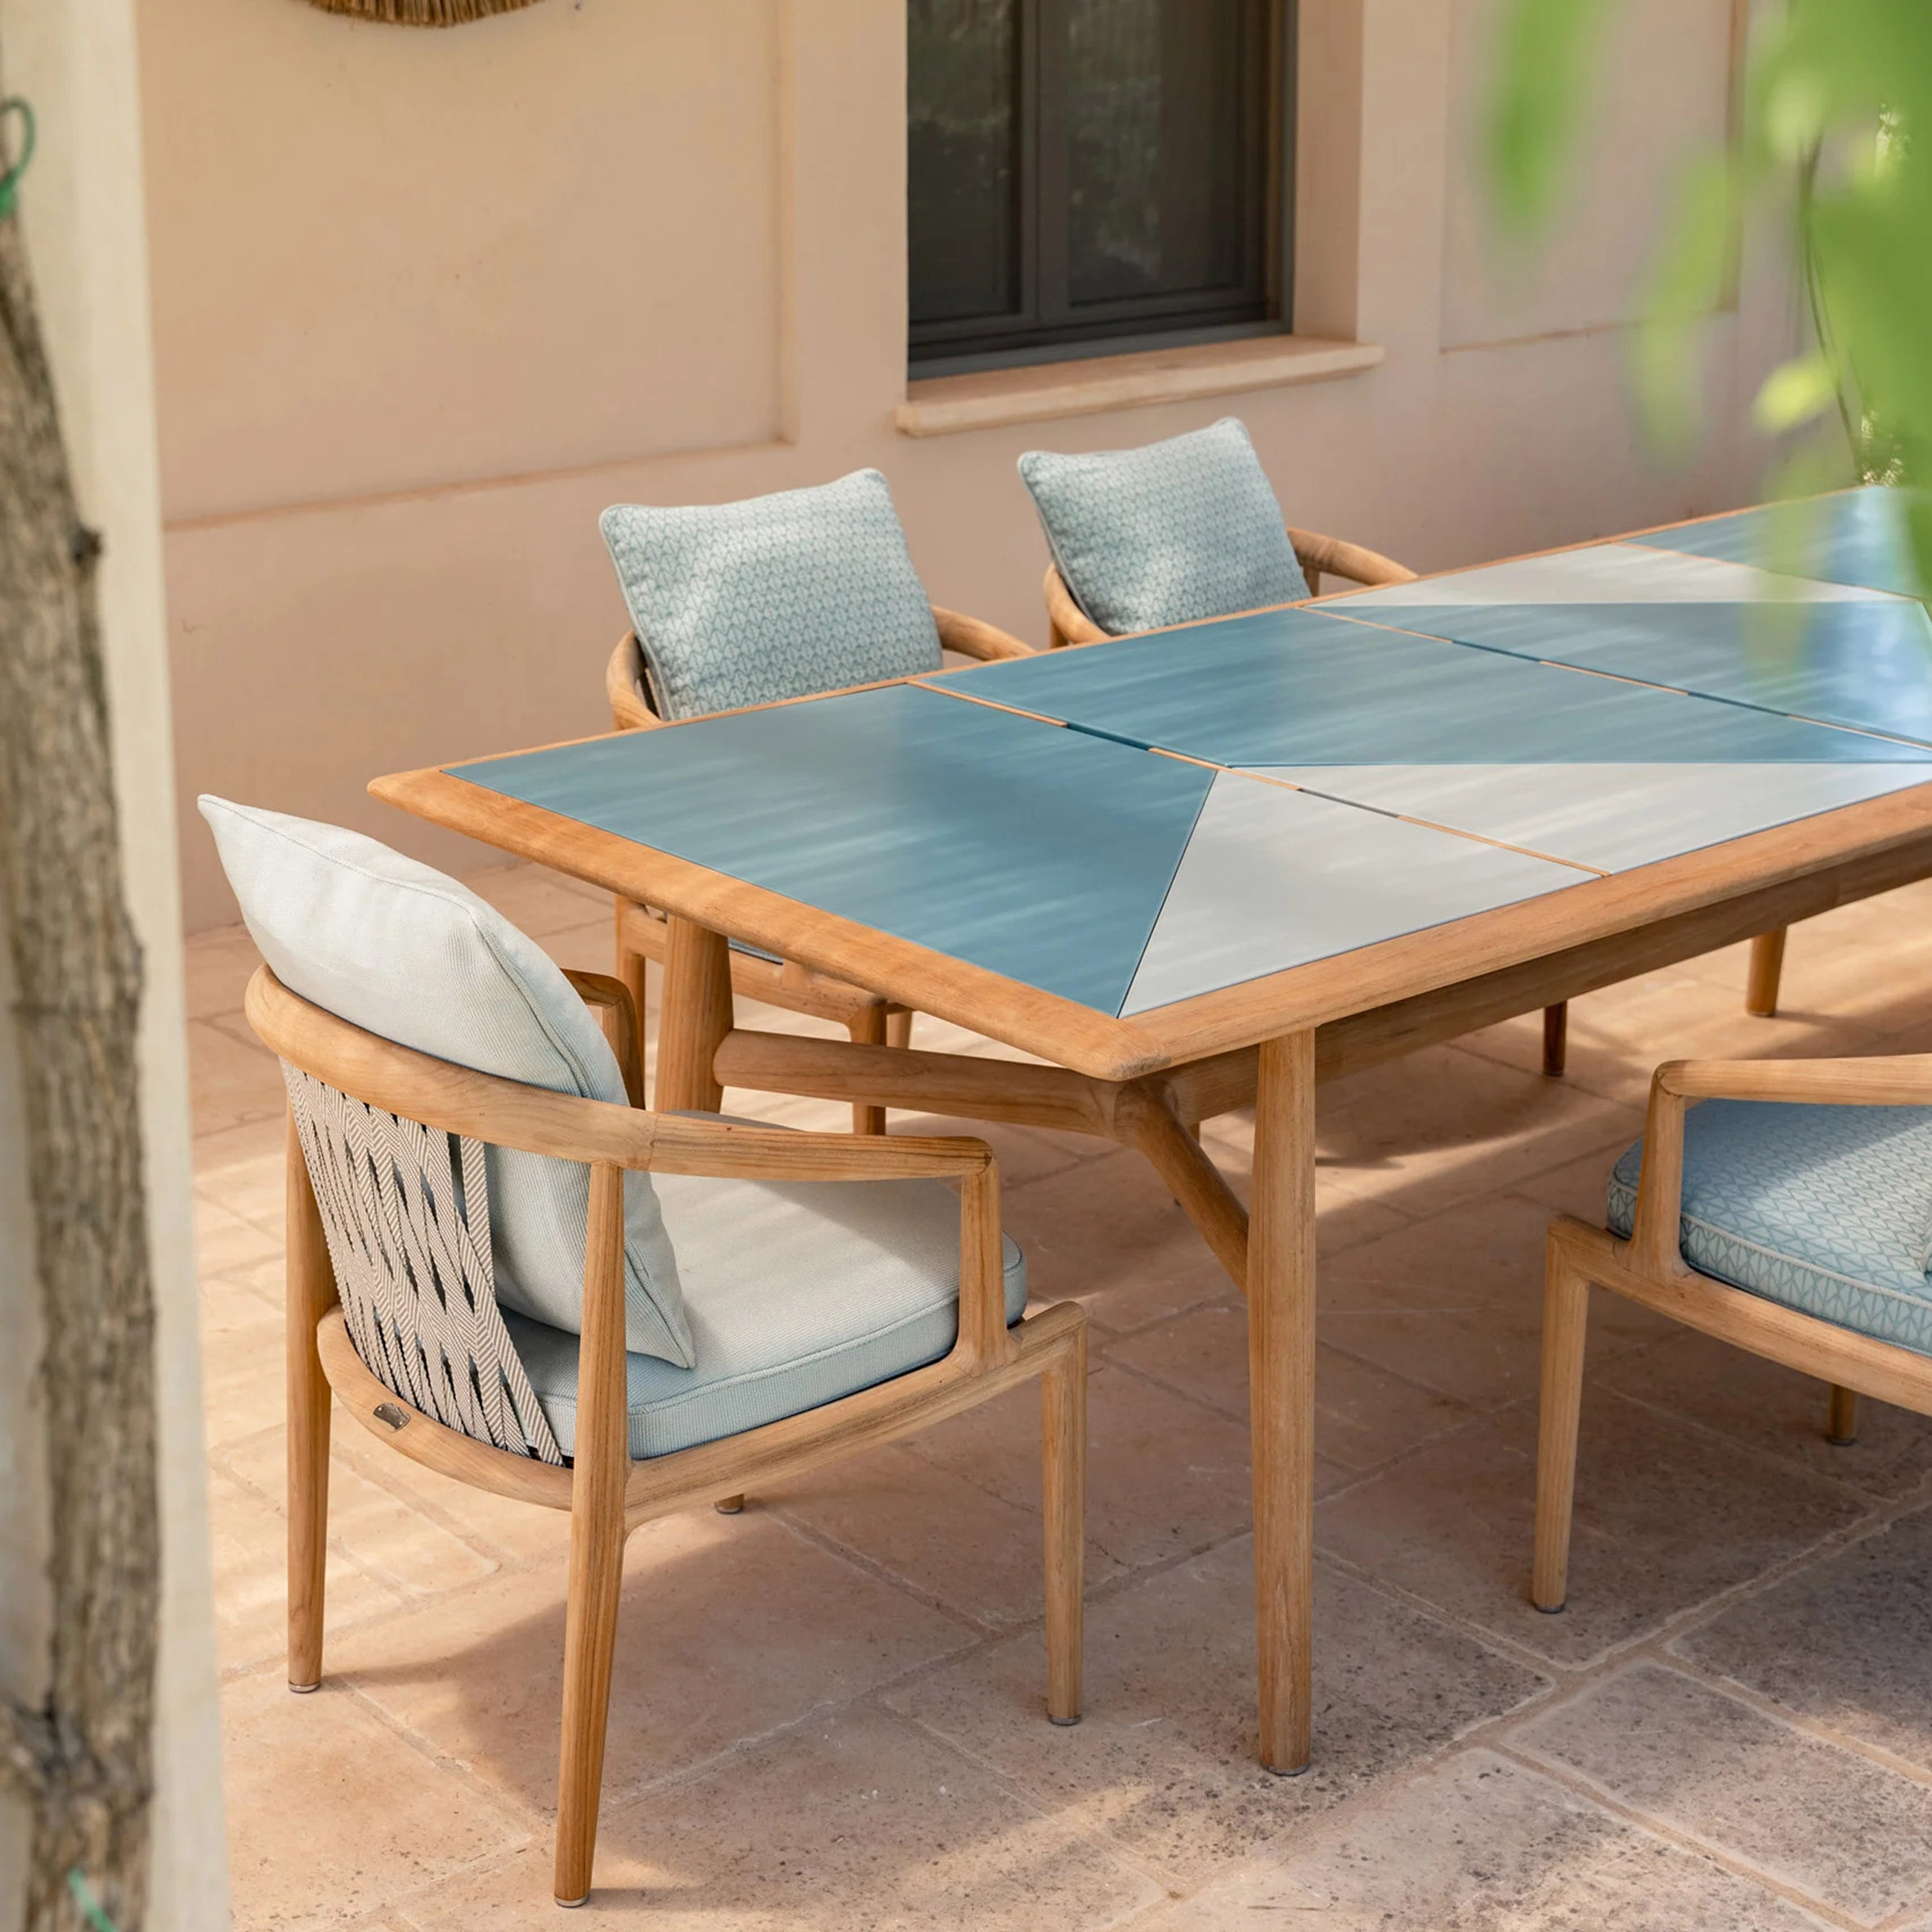 Secret Garden table by Poltrona Frau with a blue table top situated on a patio with chairs around